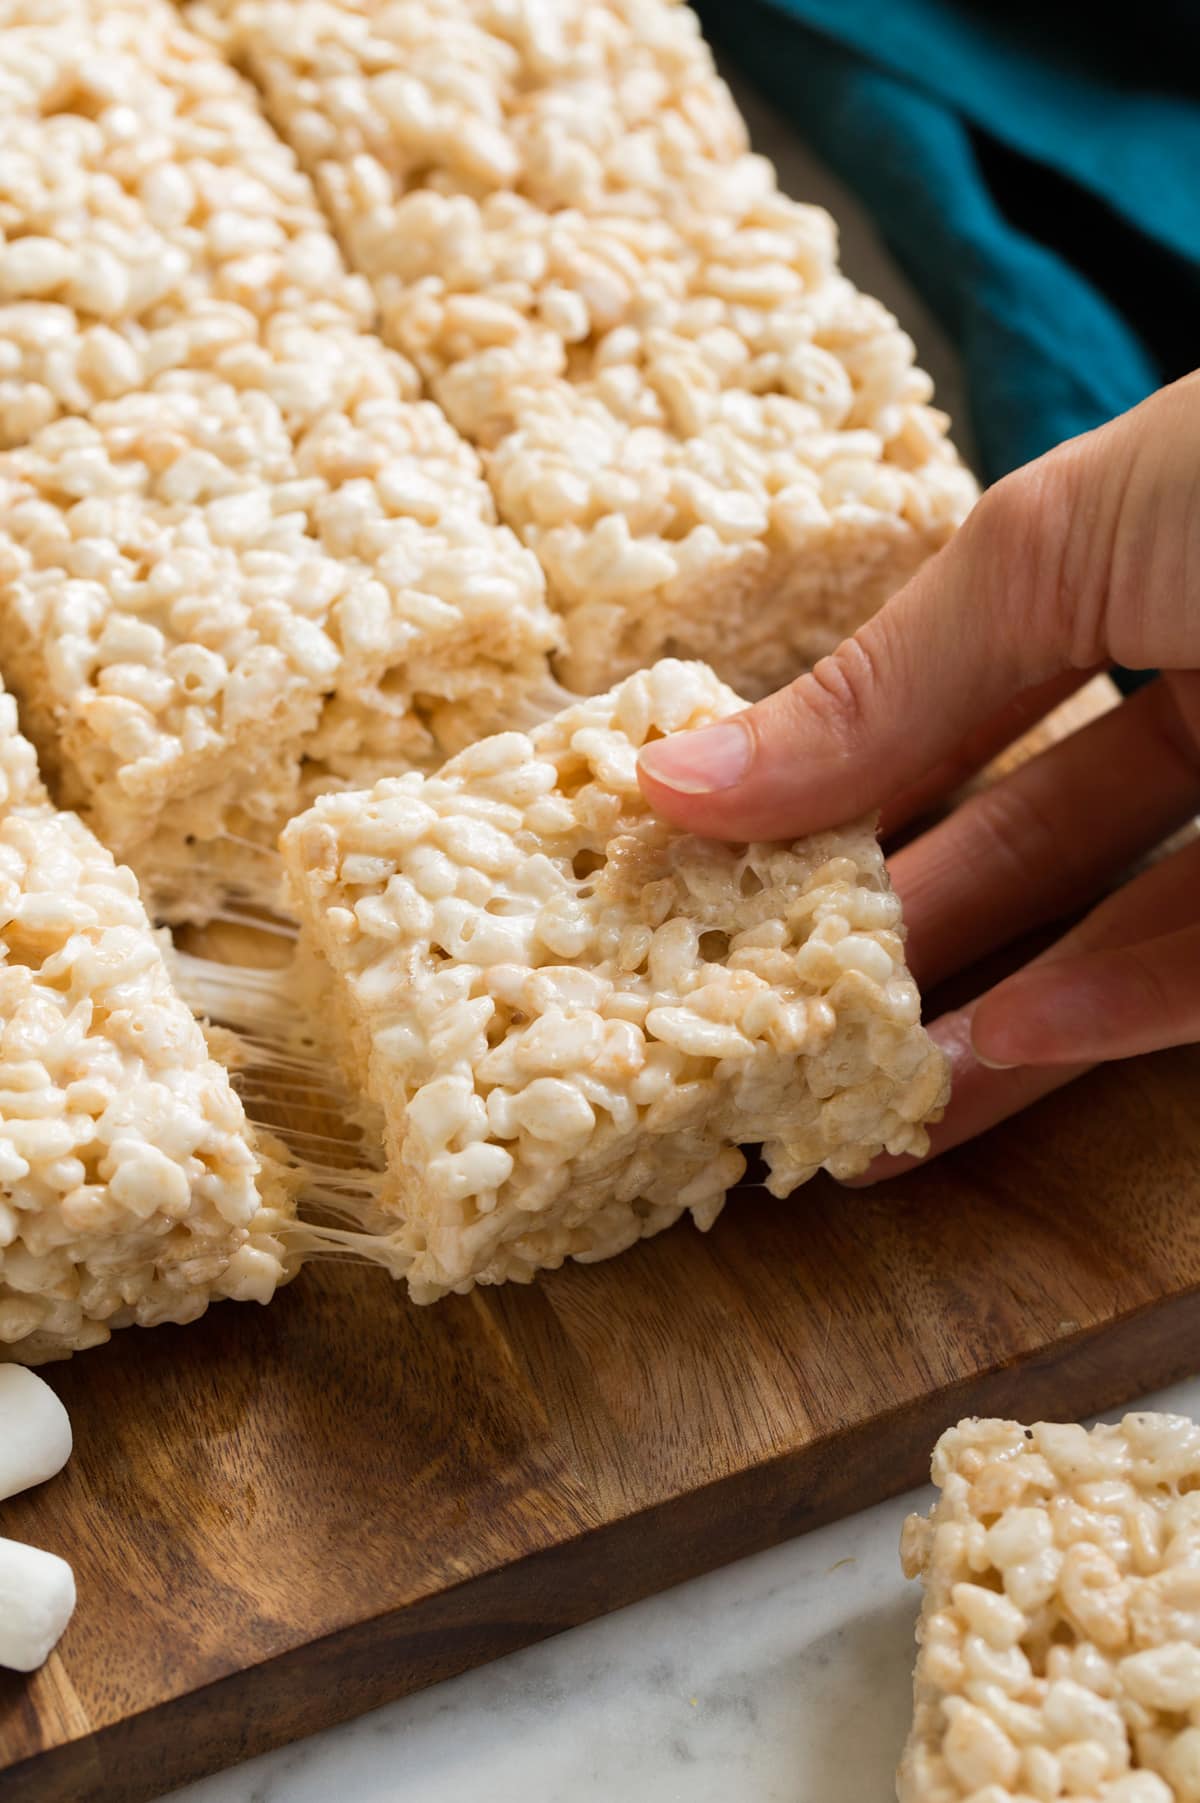 Hand removing rice krispie treat from batch.